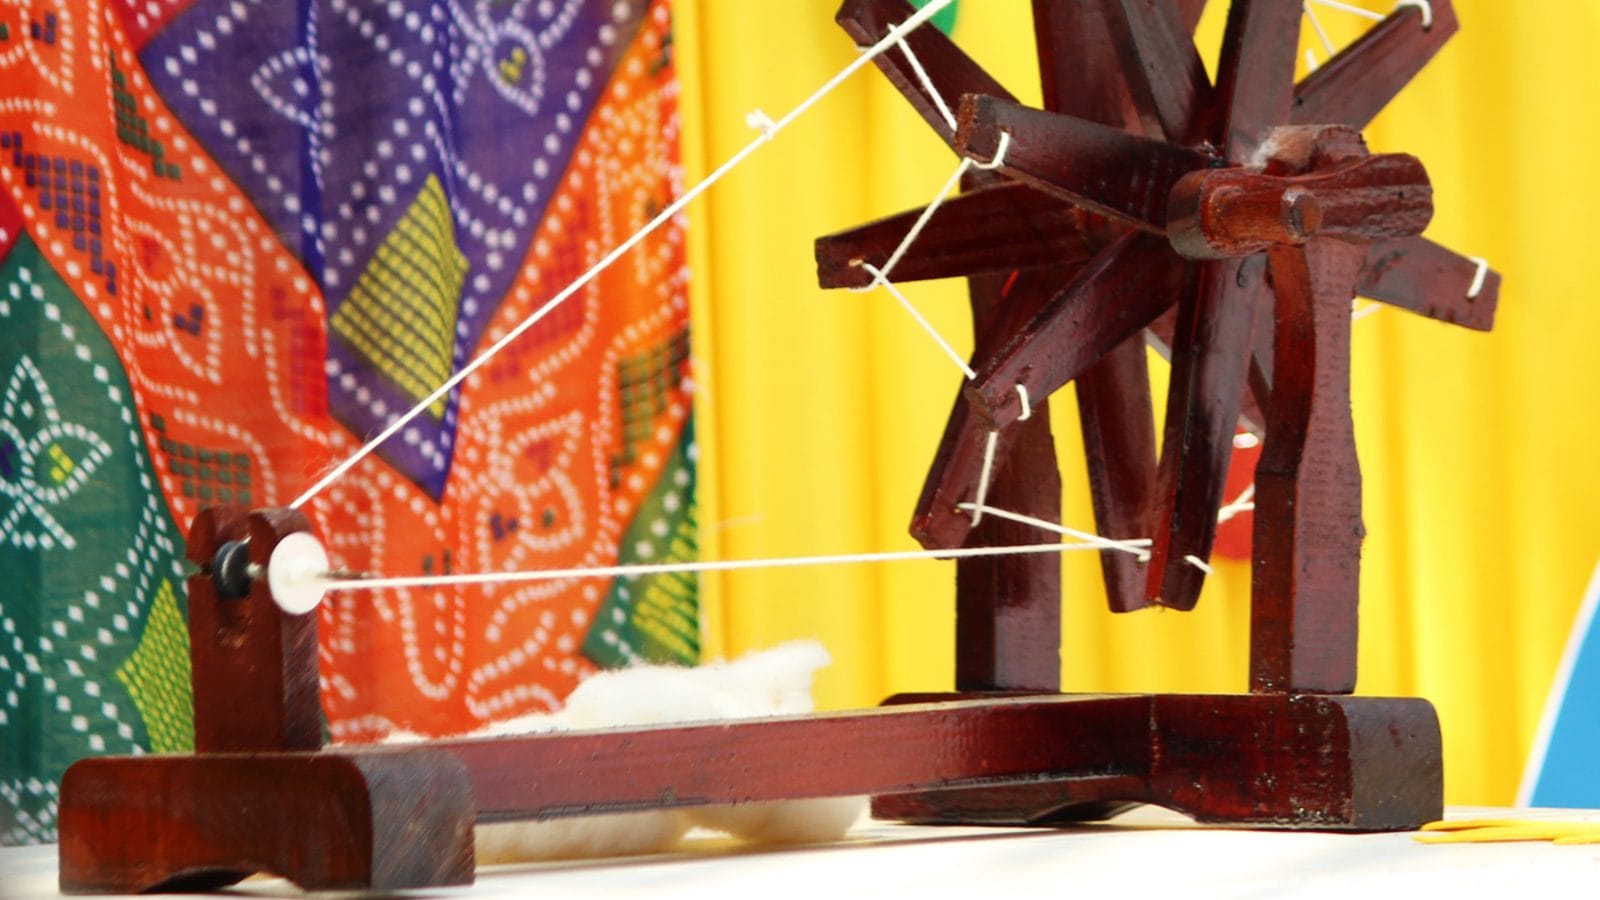 National Handloom Day 2021: 5 Handloom Products You Can Buy Today to ...